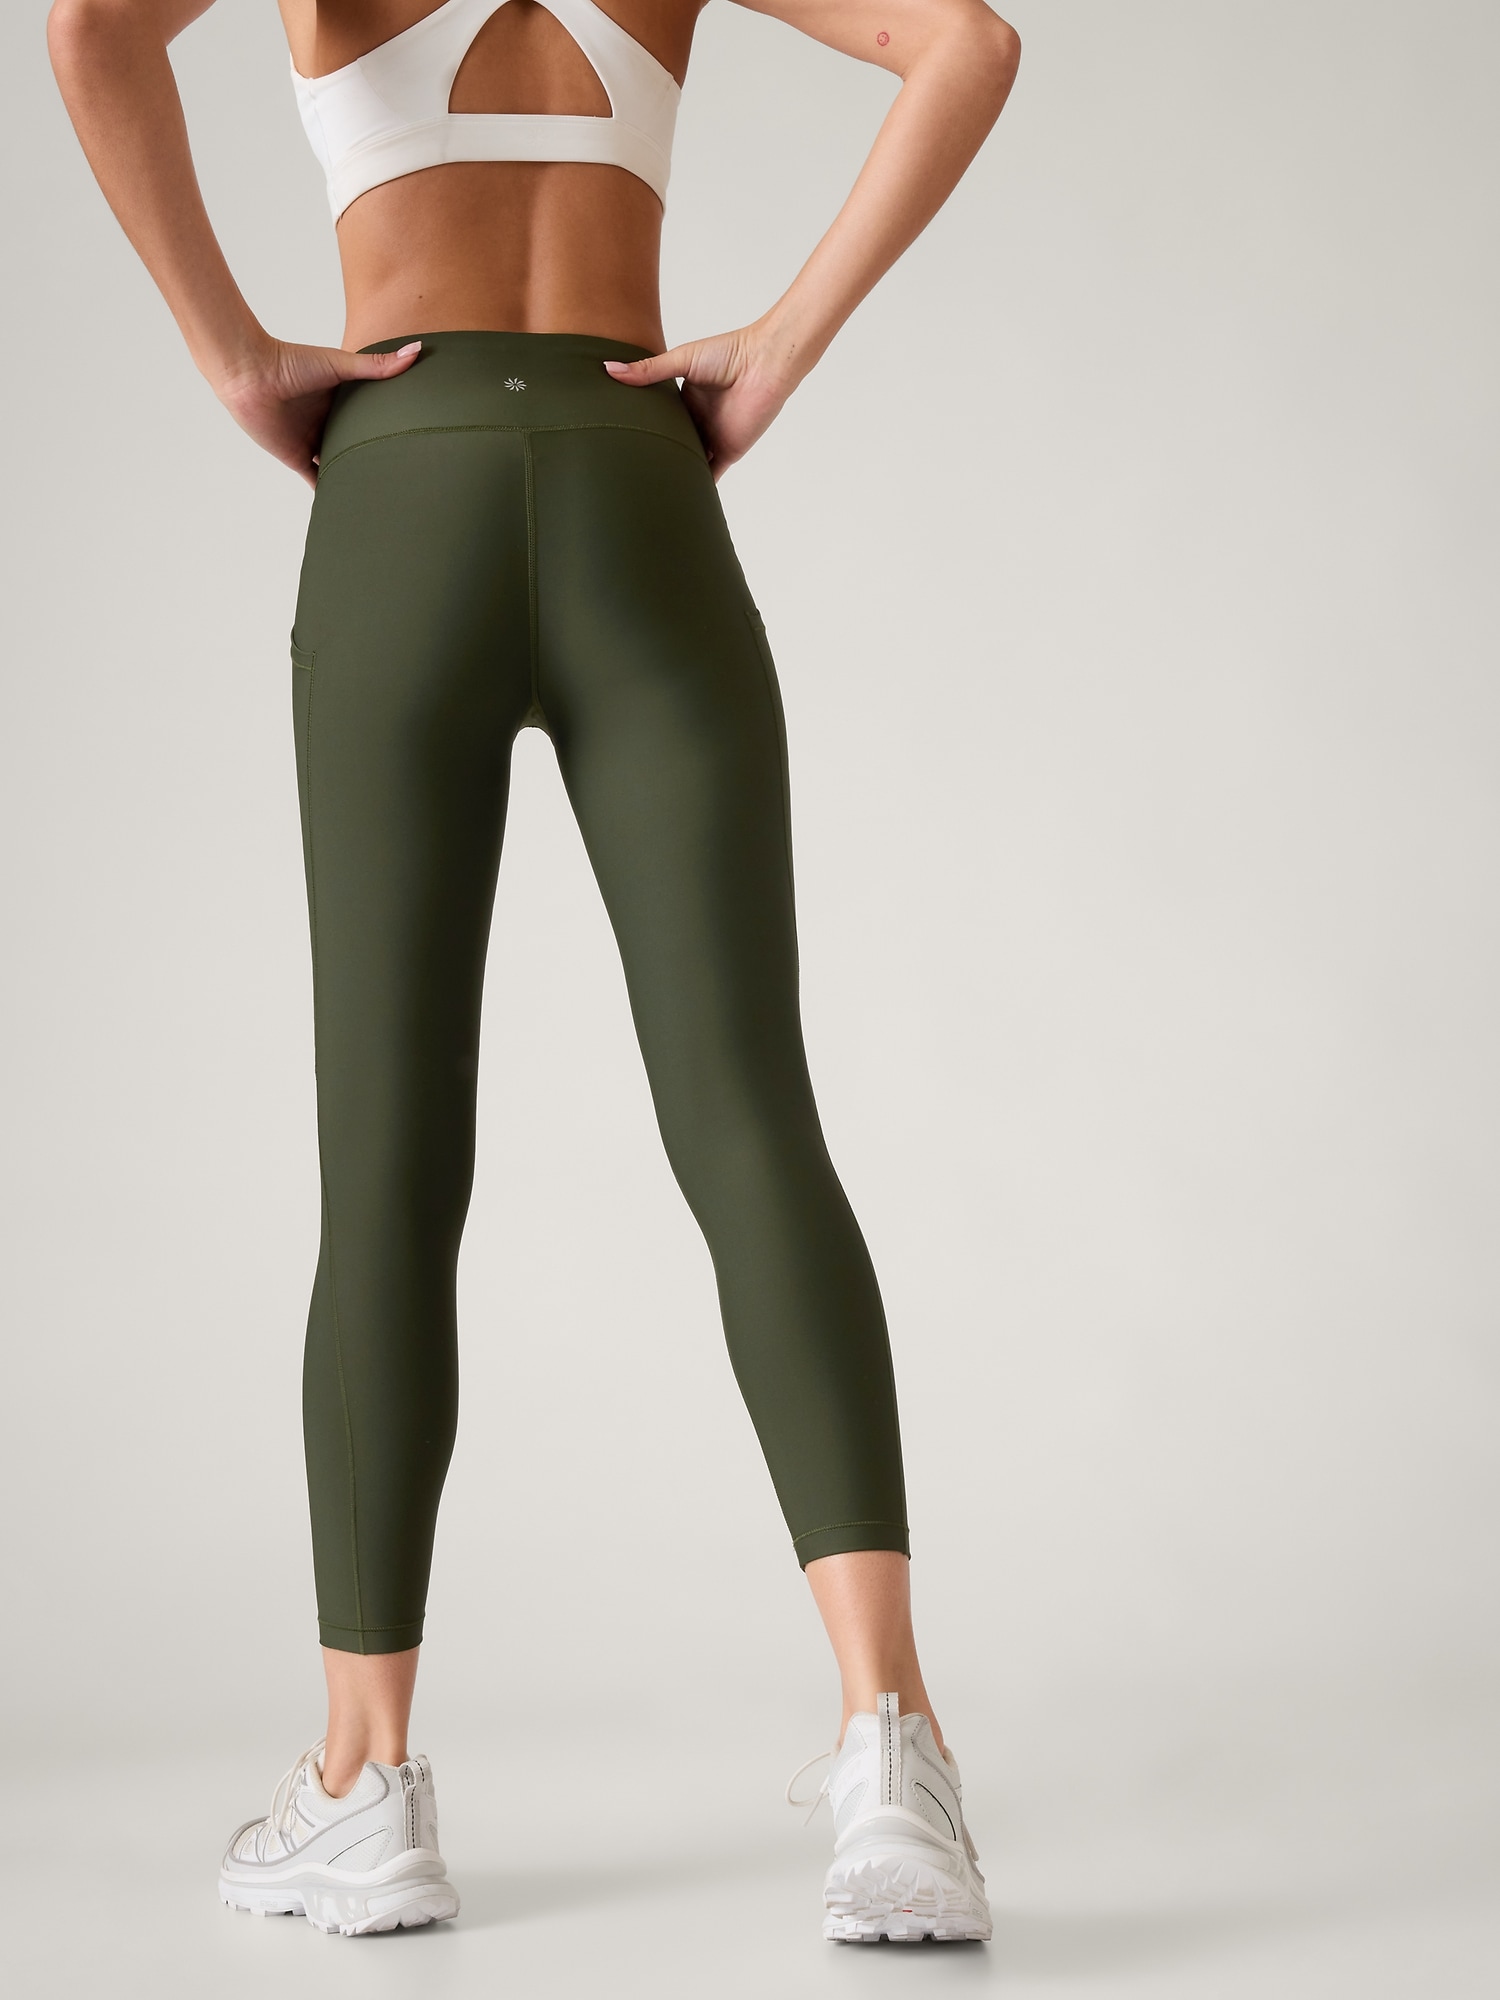 Rep 7/8 Length Tights - Army Green